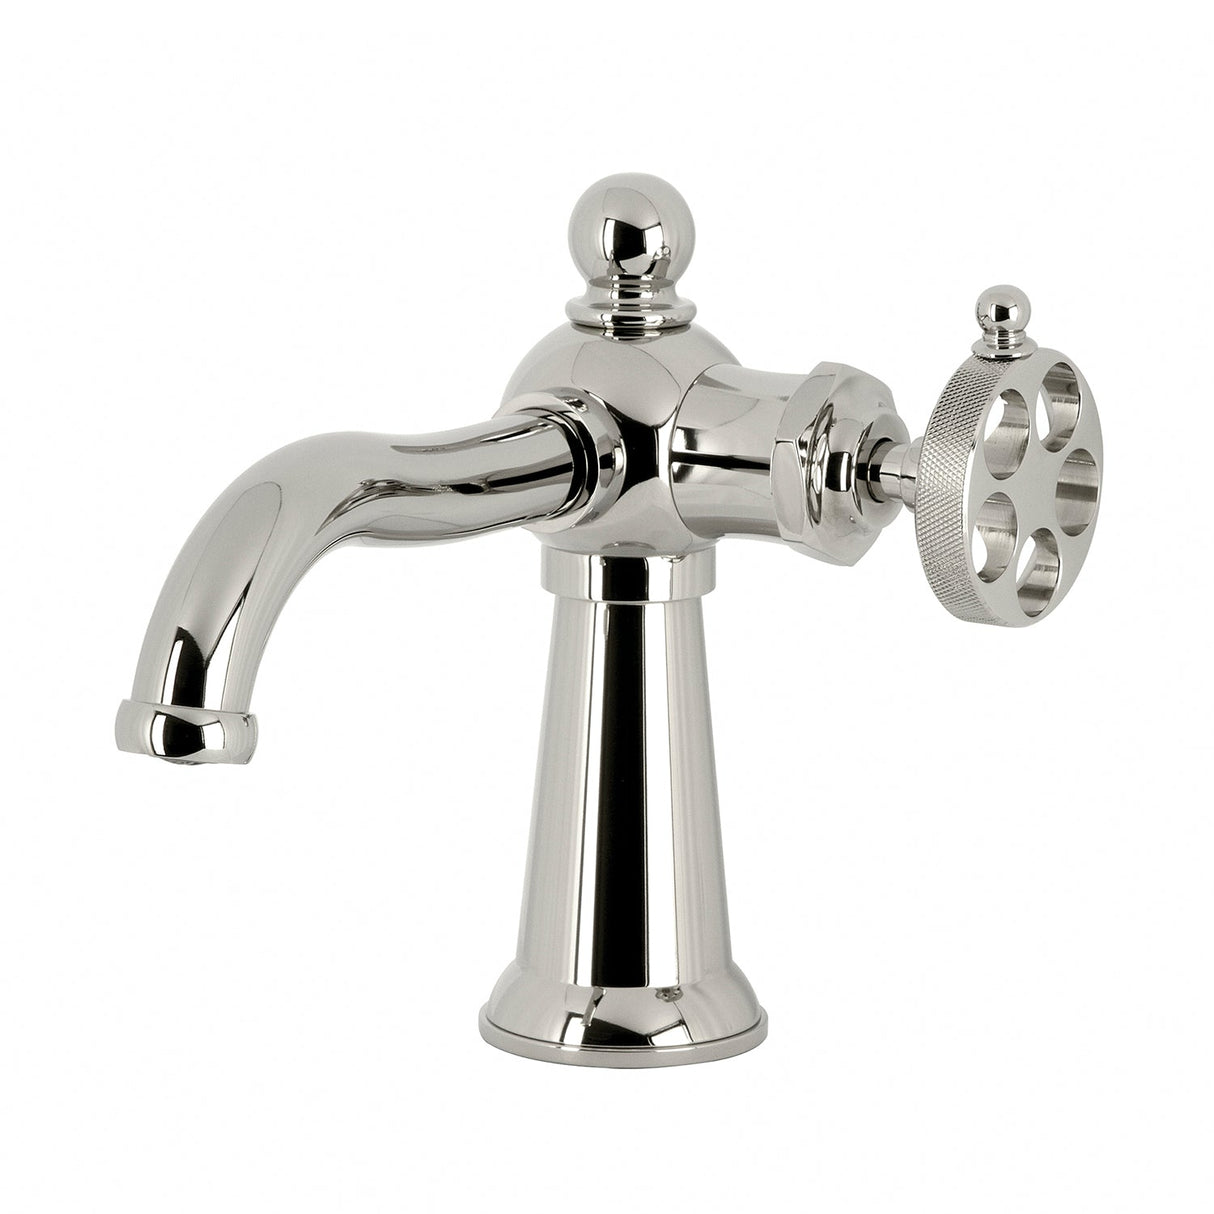 Wendell KS3546RKZ Single-Handle 1-Hole Deck Mount Bathroom Faucet with Knurled Handle and Push Pop-Up Drain, Polished Nickel